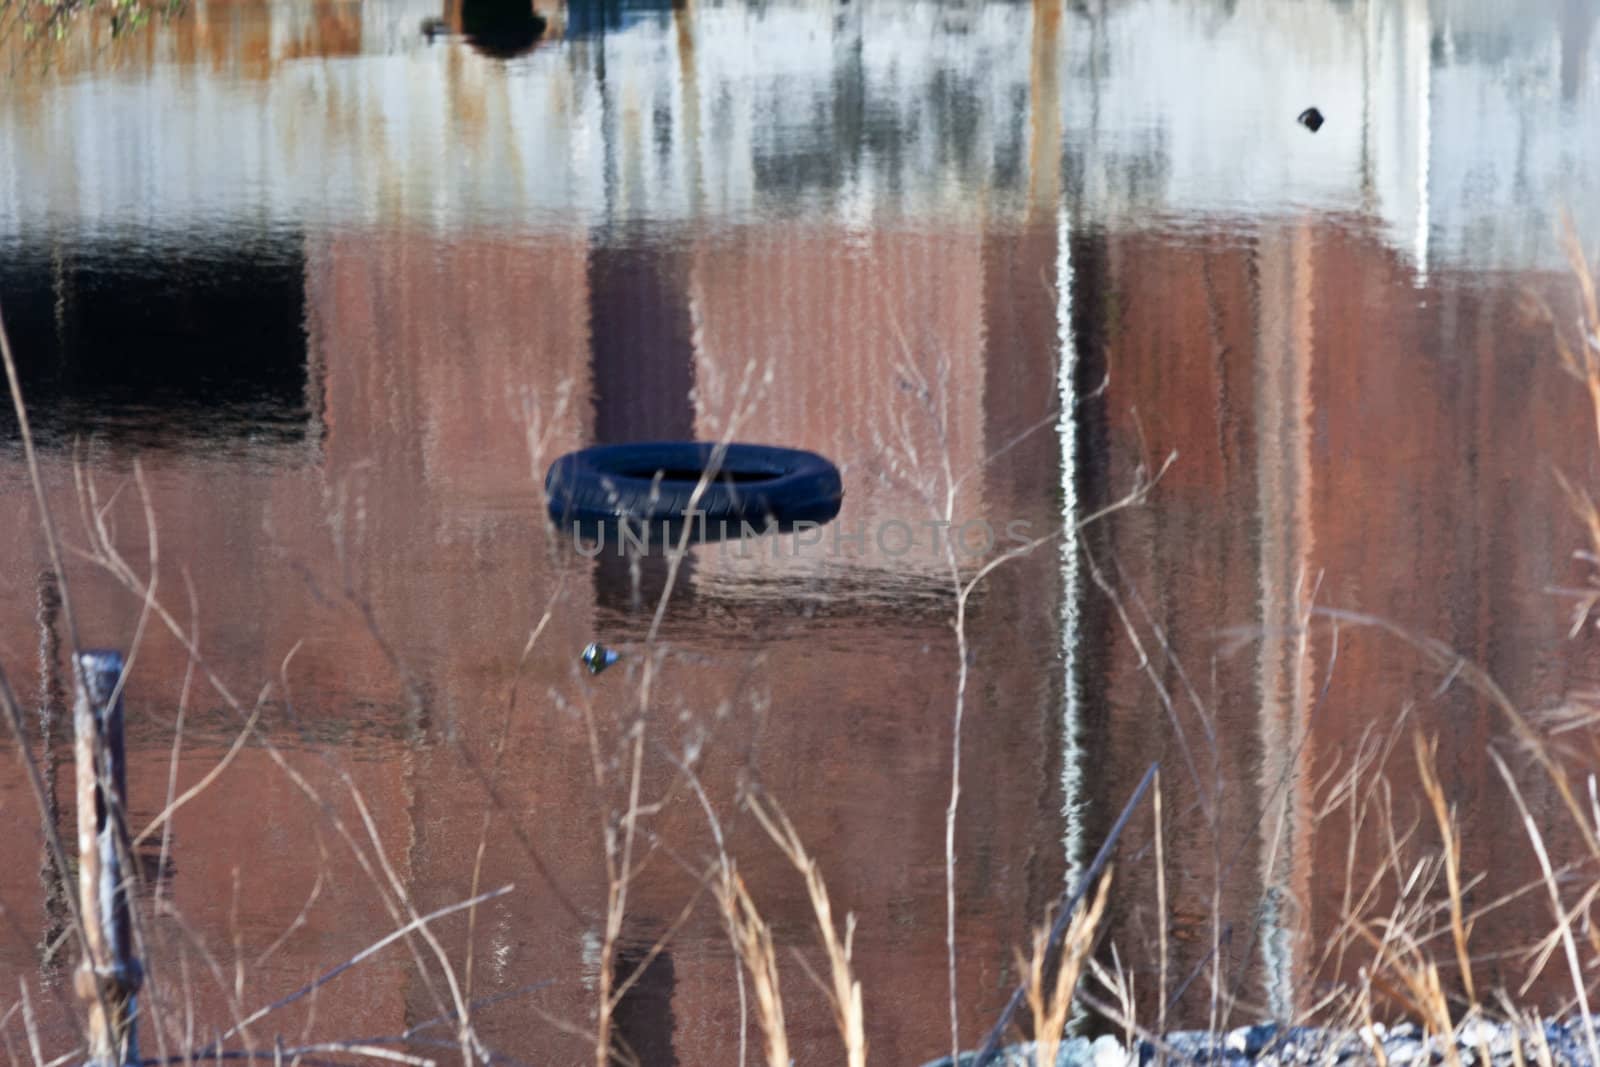 An old tire floating in a pool of water used in a mill operation.